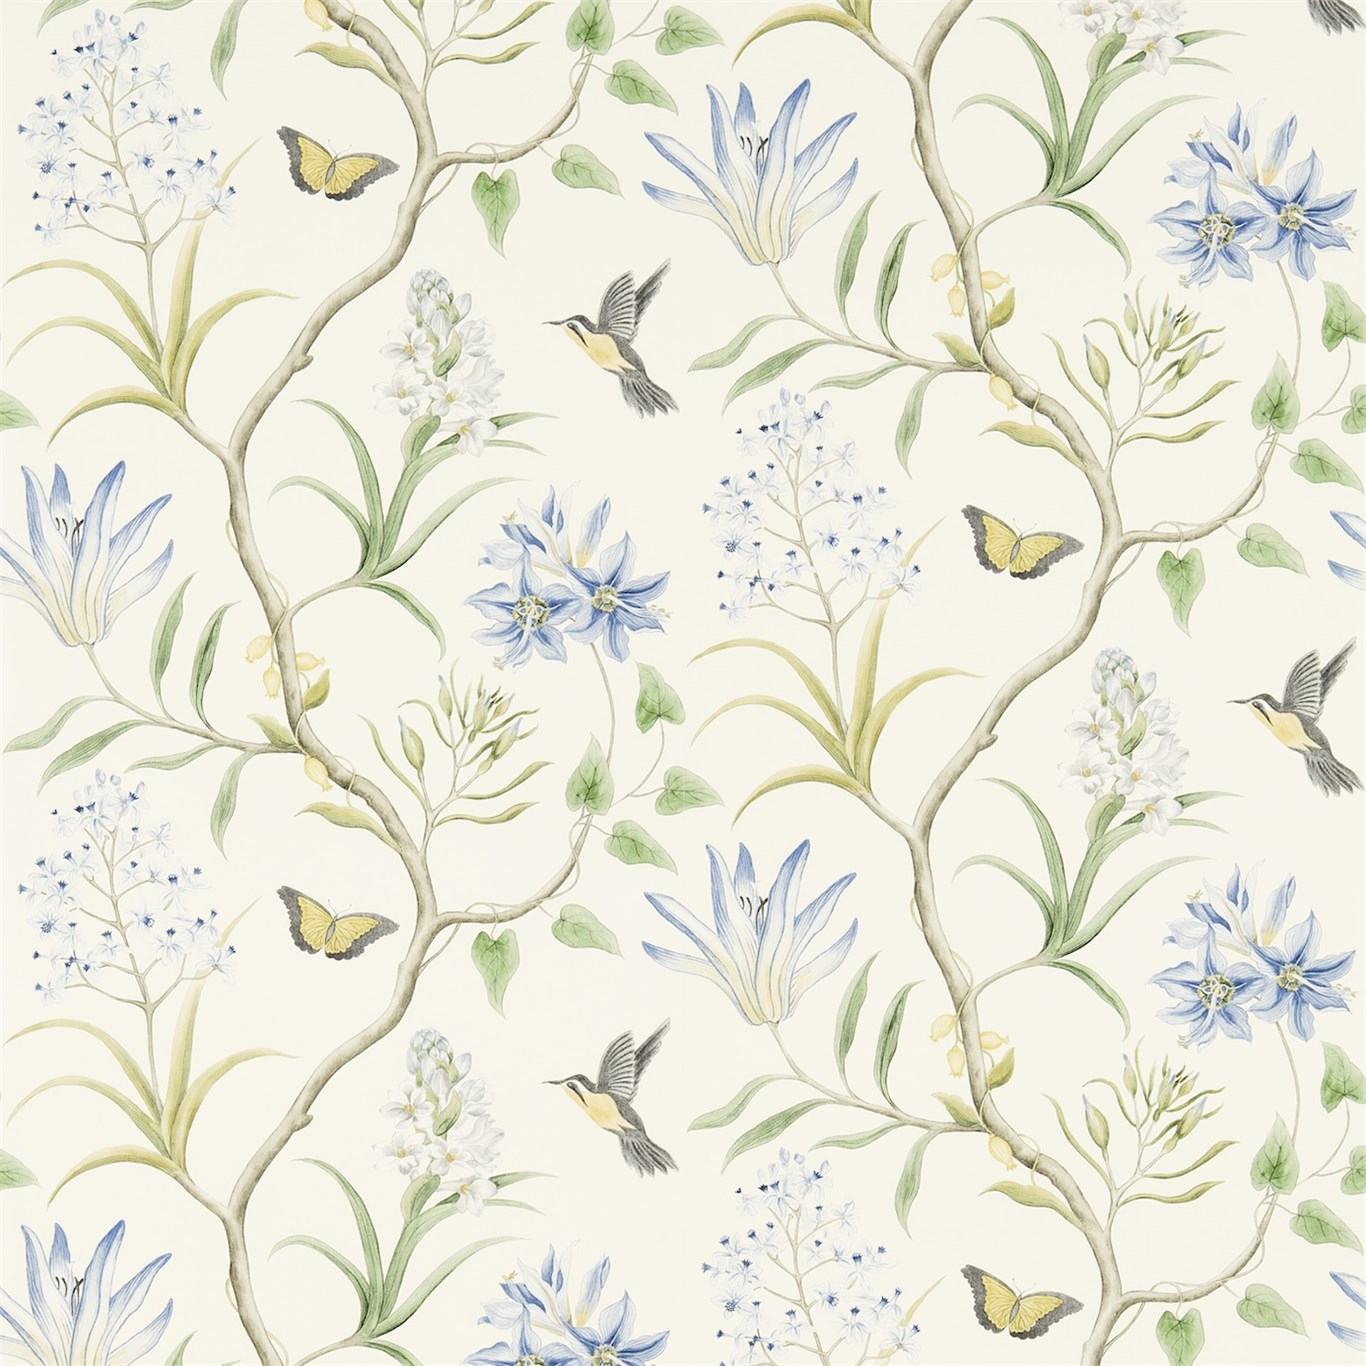 Wallpaper - Sanderson Voyage of Discovery Clementine Delft Blue